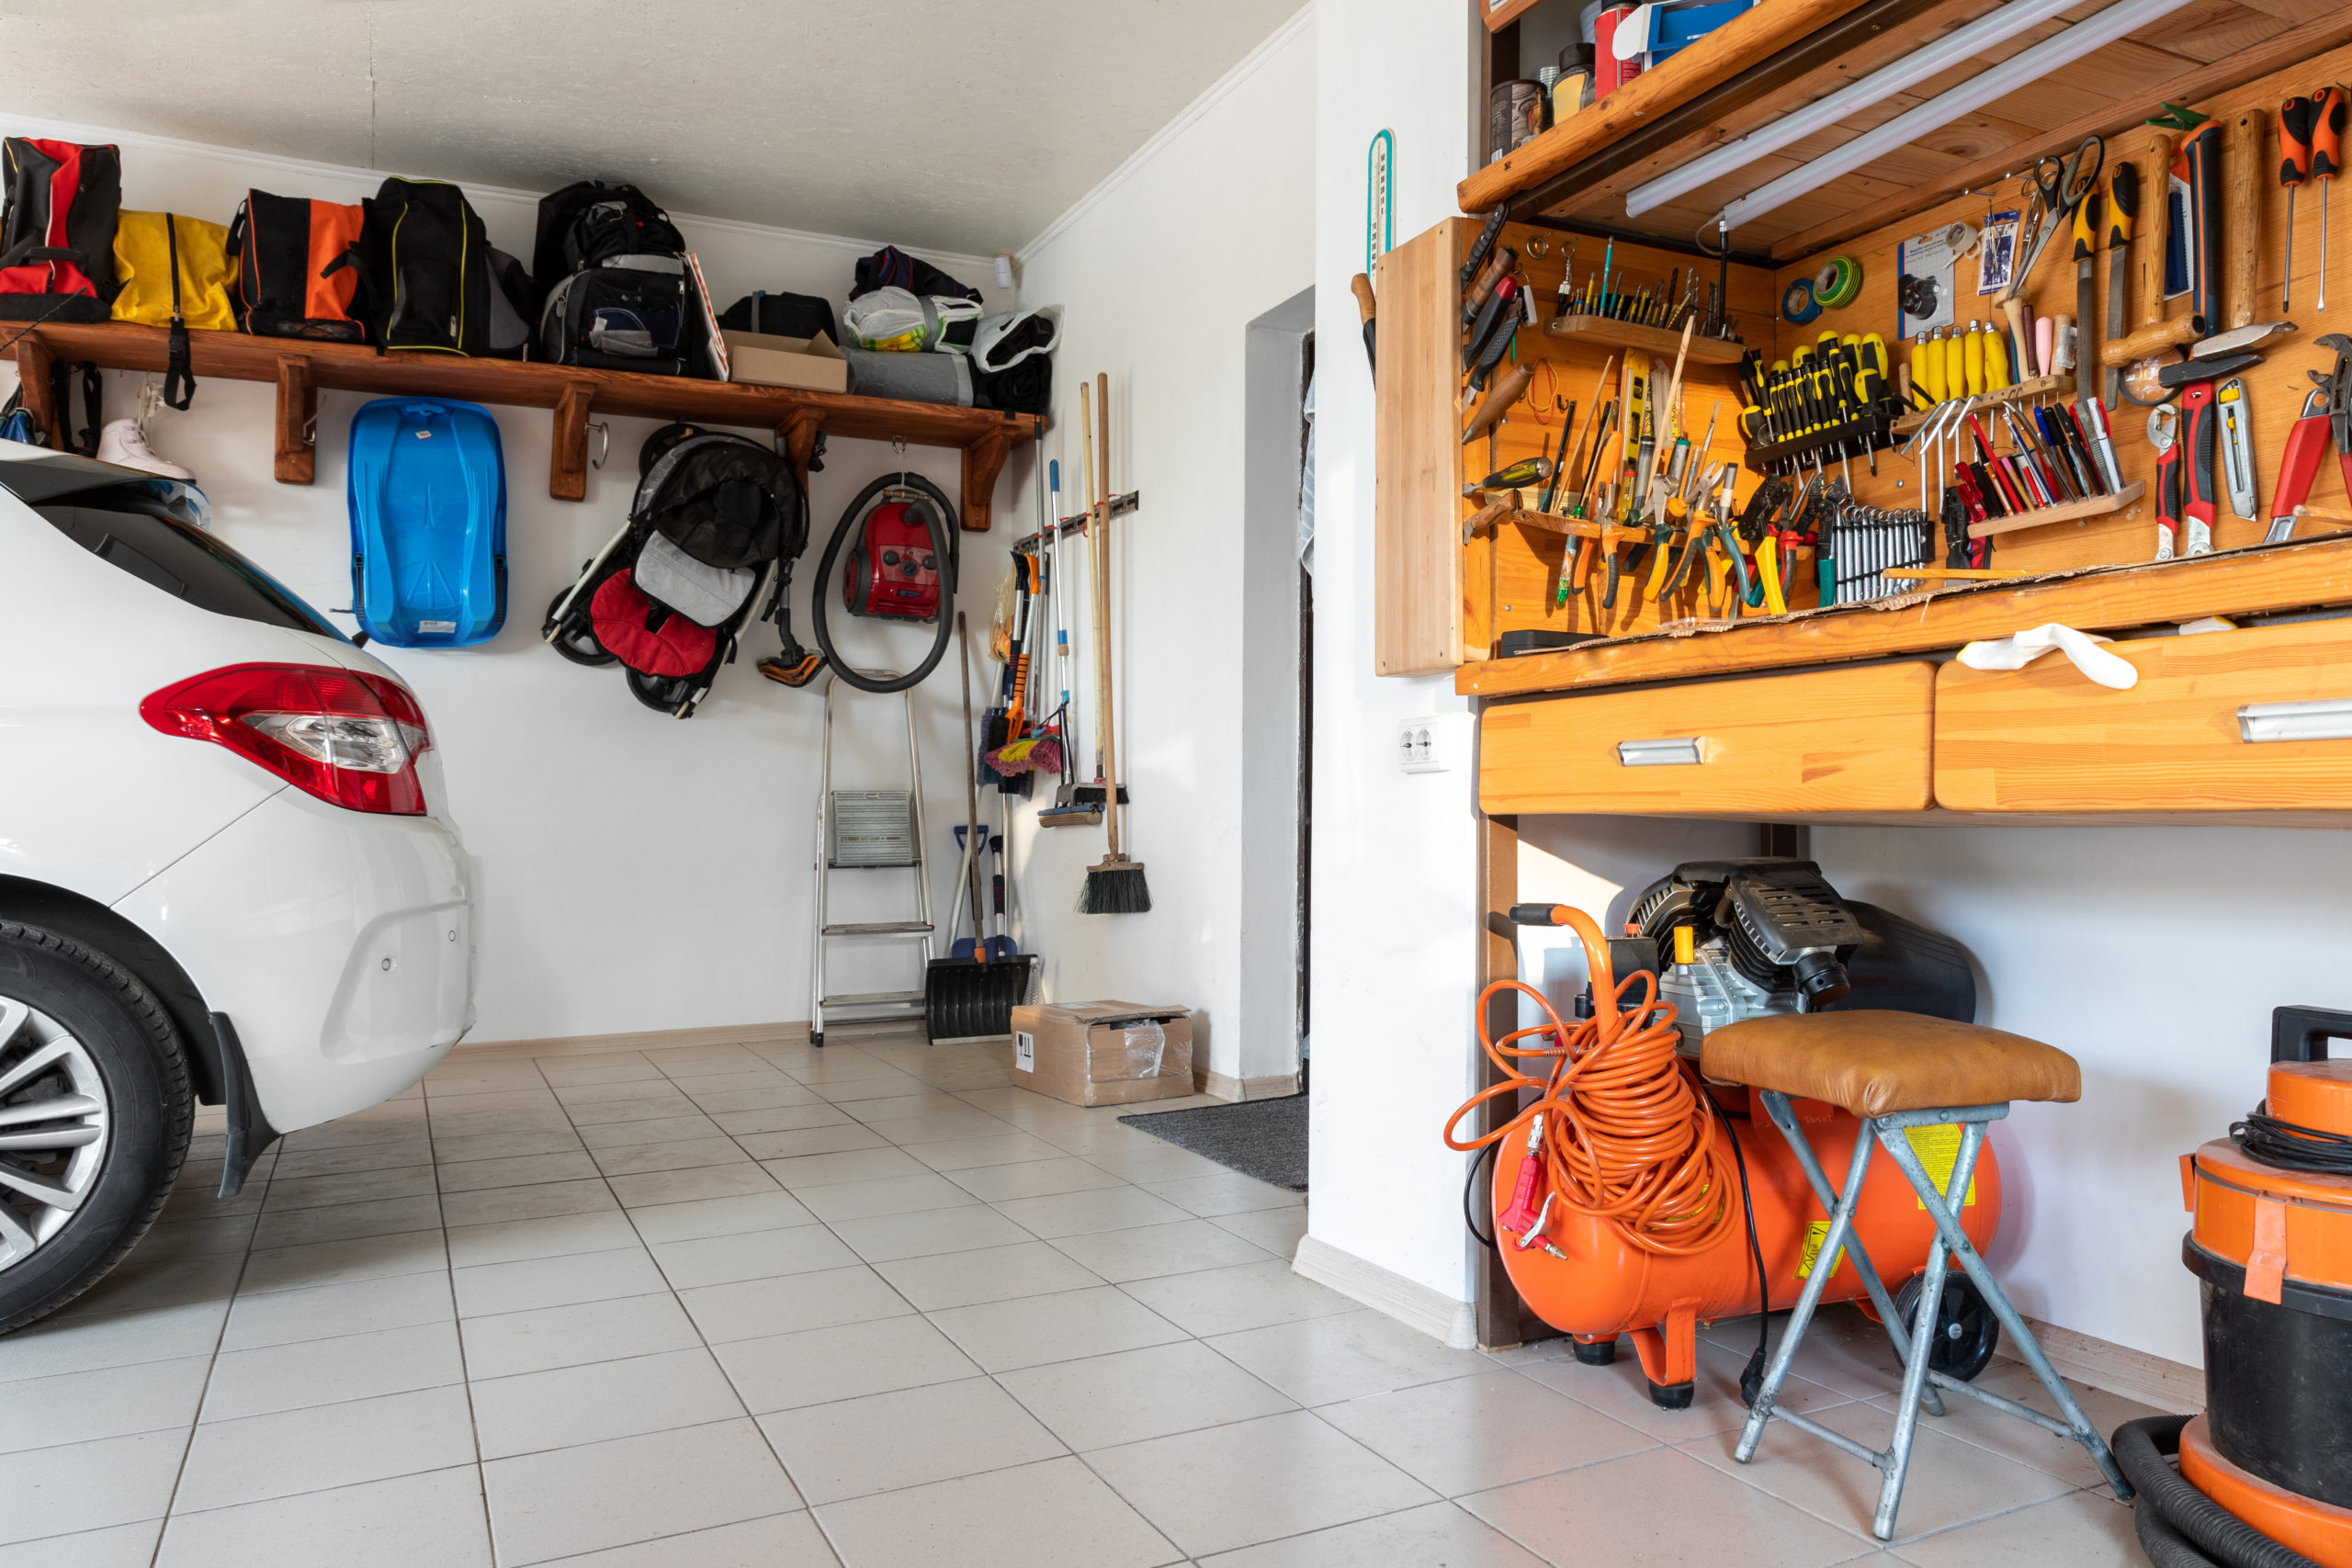 Home suburban car garage interior with wooden shelf, tools equipment stuff storage warehouse on white wall indoor. Vehicle parked at house parking background. DIY workbench for repair home appliances.